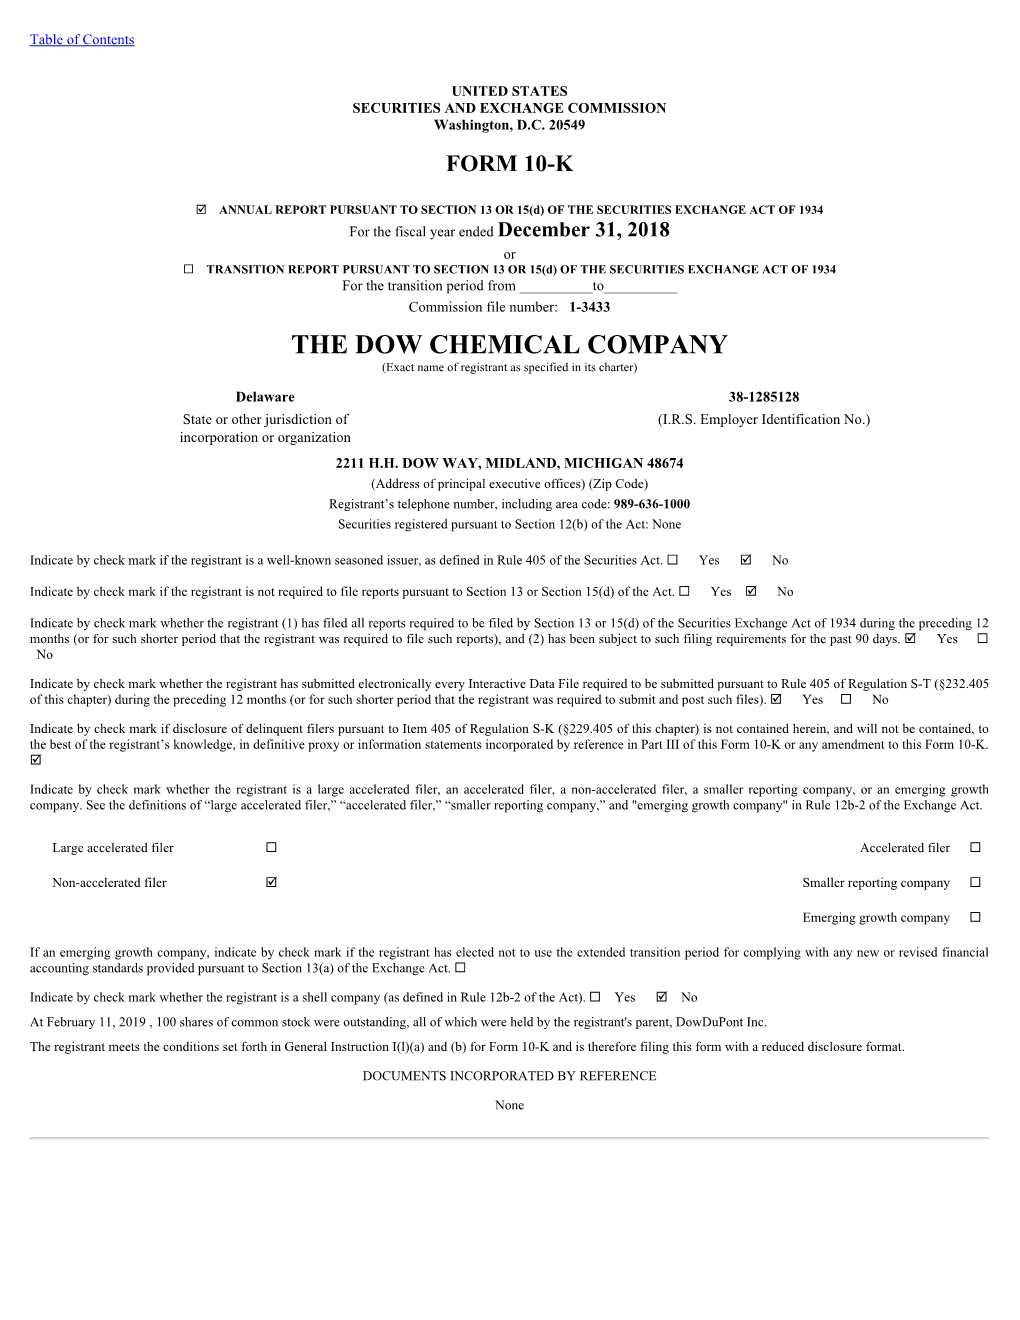 THE DOW CHEMICAL COMPANY (Exact Name of Registrant As Specified in Its Charter)